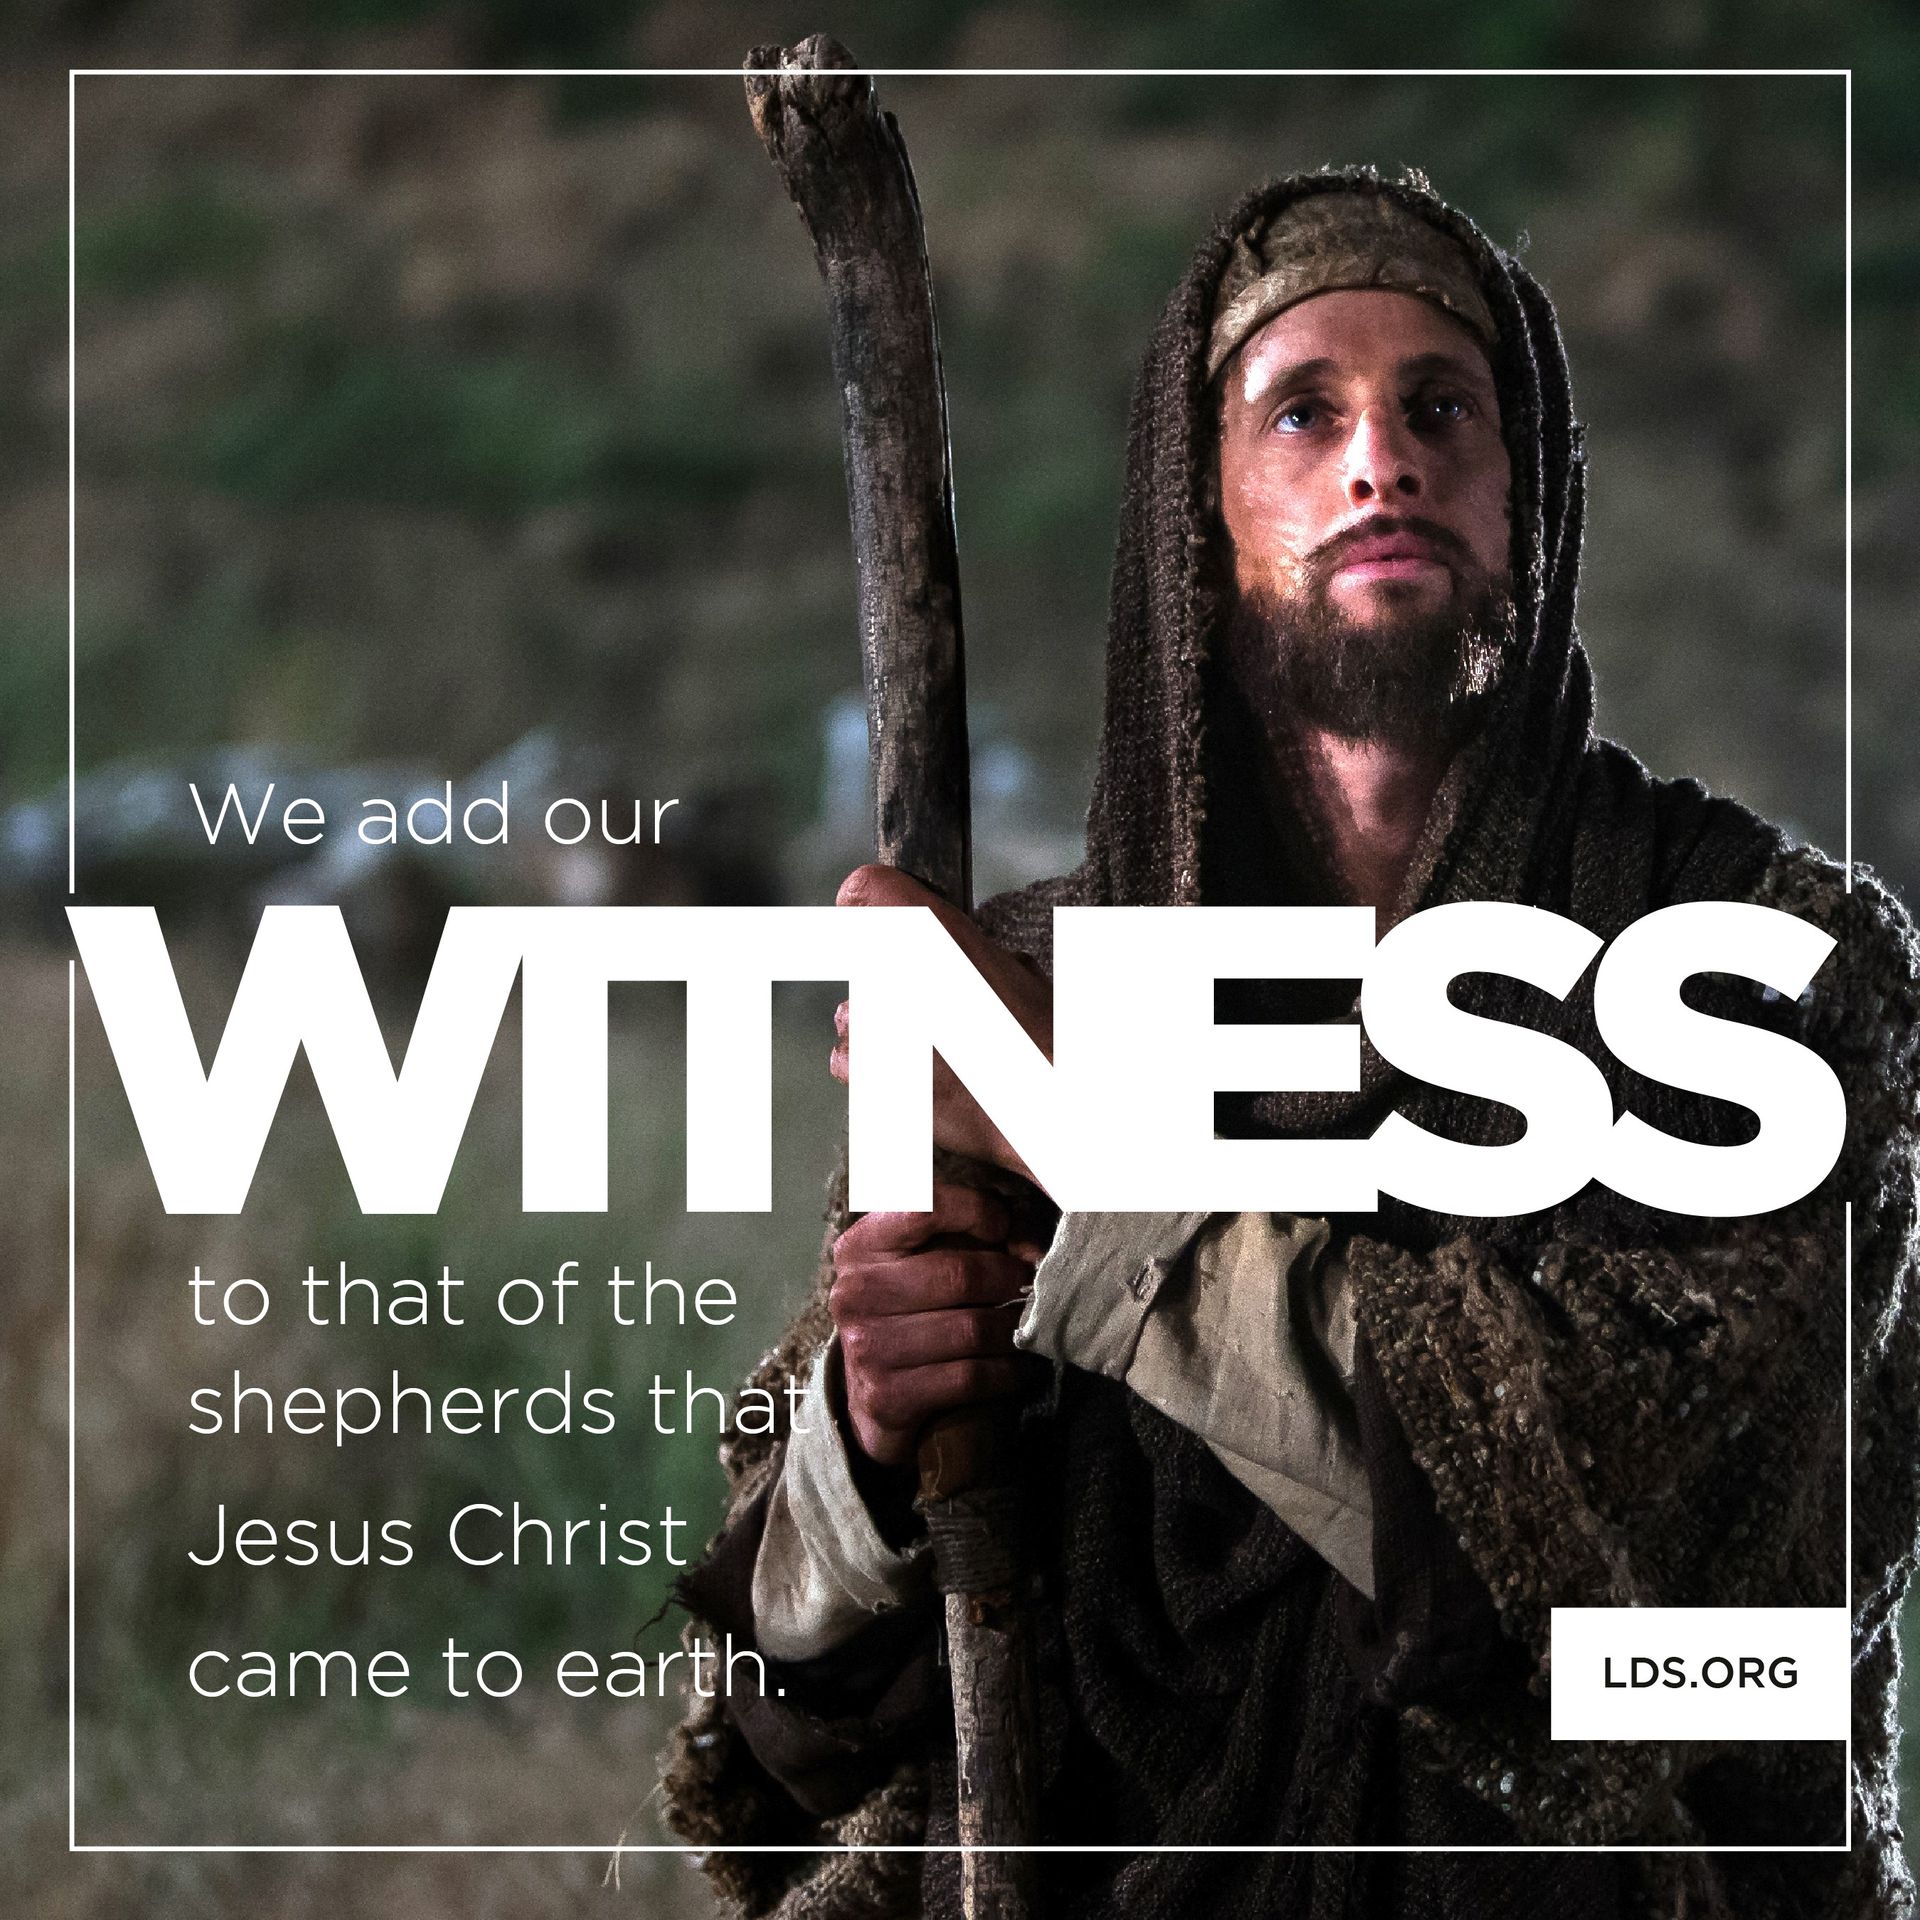 “We add our witness to that of the shepherds that Jesus Christ came to earth.”—Elder Ronald A. Rasband, “Glory to God” © undefined ipCode 1.